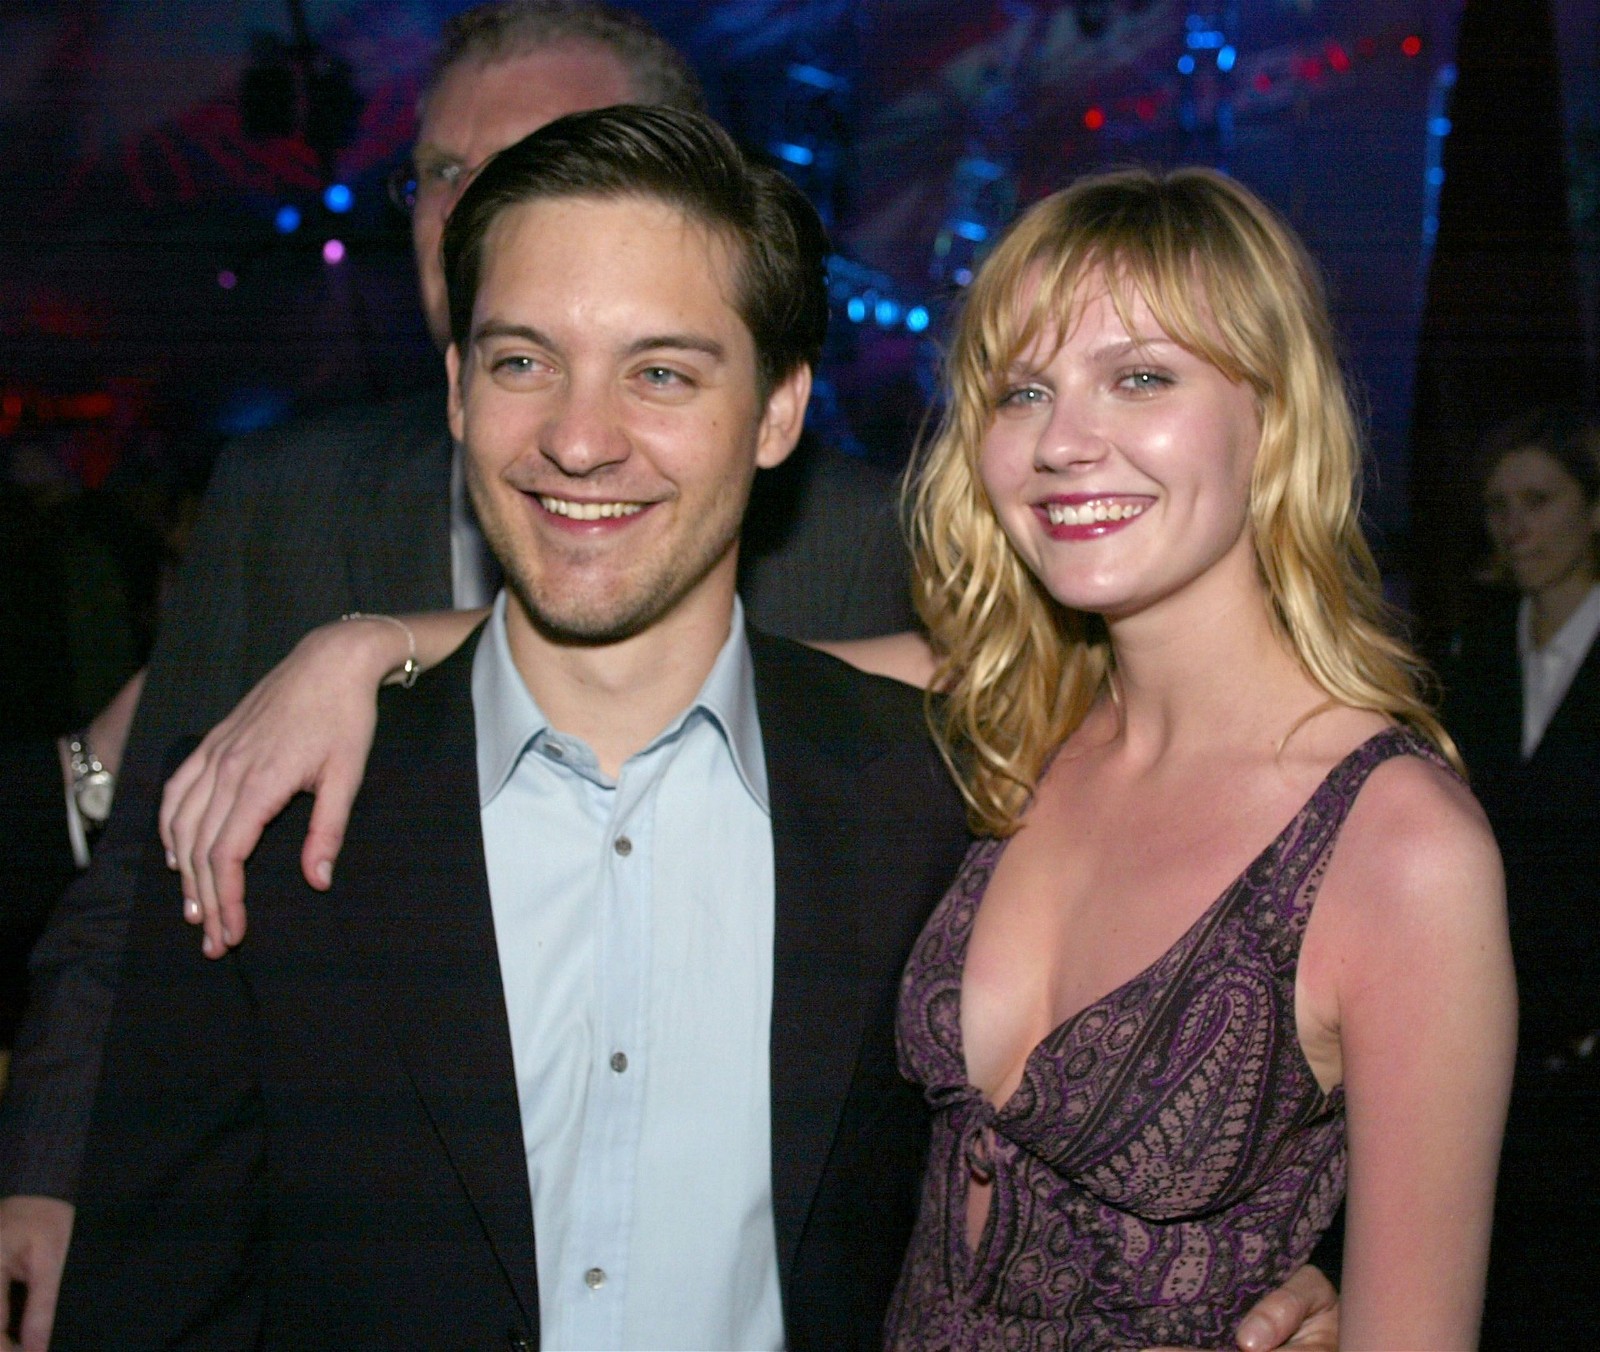 Kristen Dunst also dated her co-star Toby Maguire